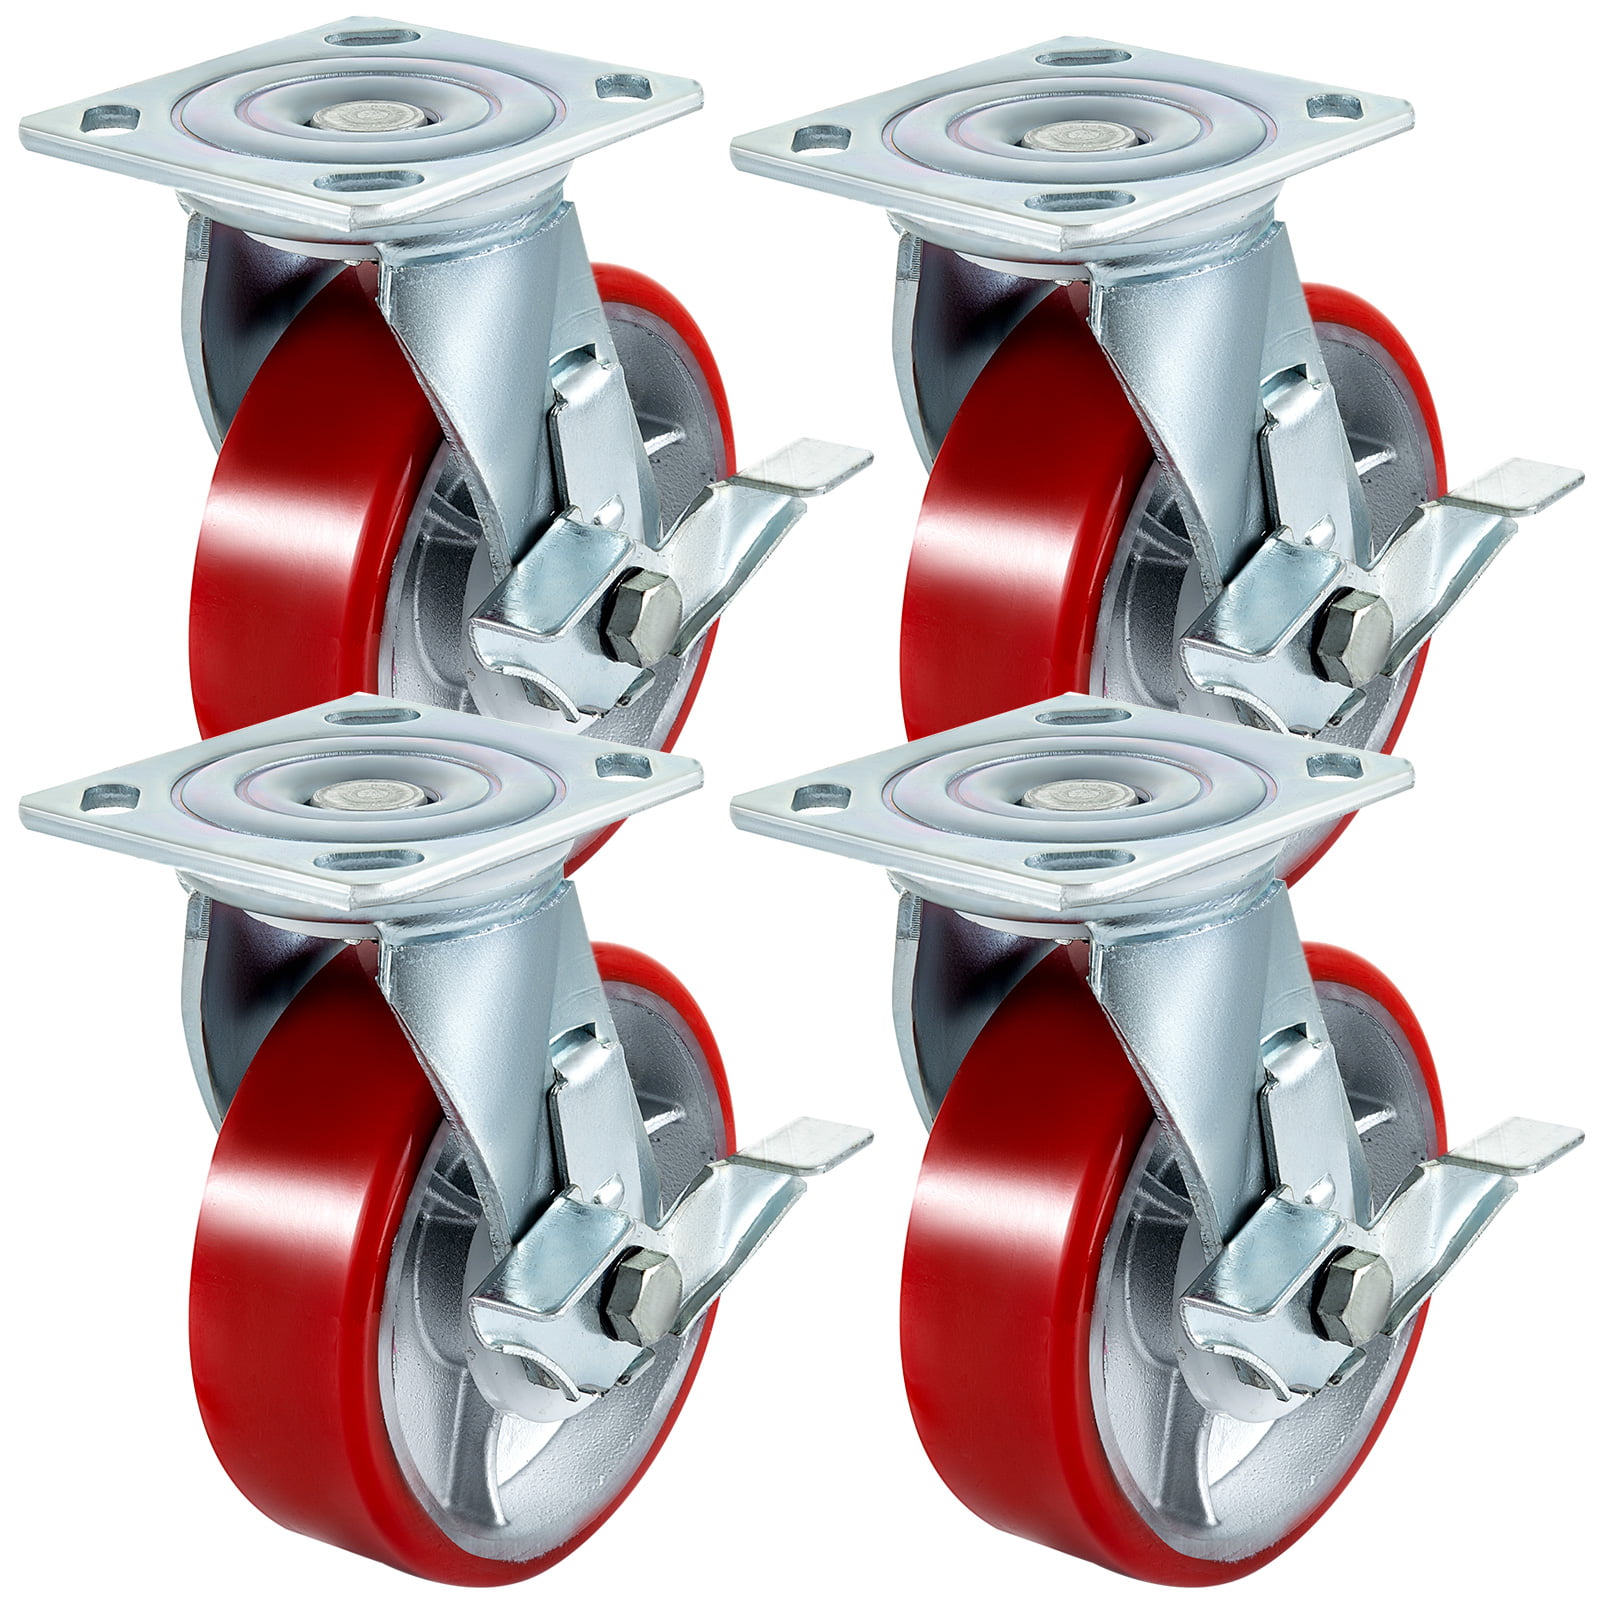 Details about   4 Heavy Duty Caster Set 4 Inch  Polyurethane On C-ast Iron Wheels No Mark Red 